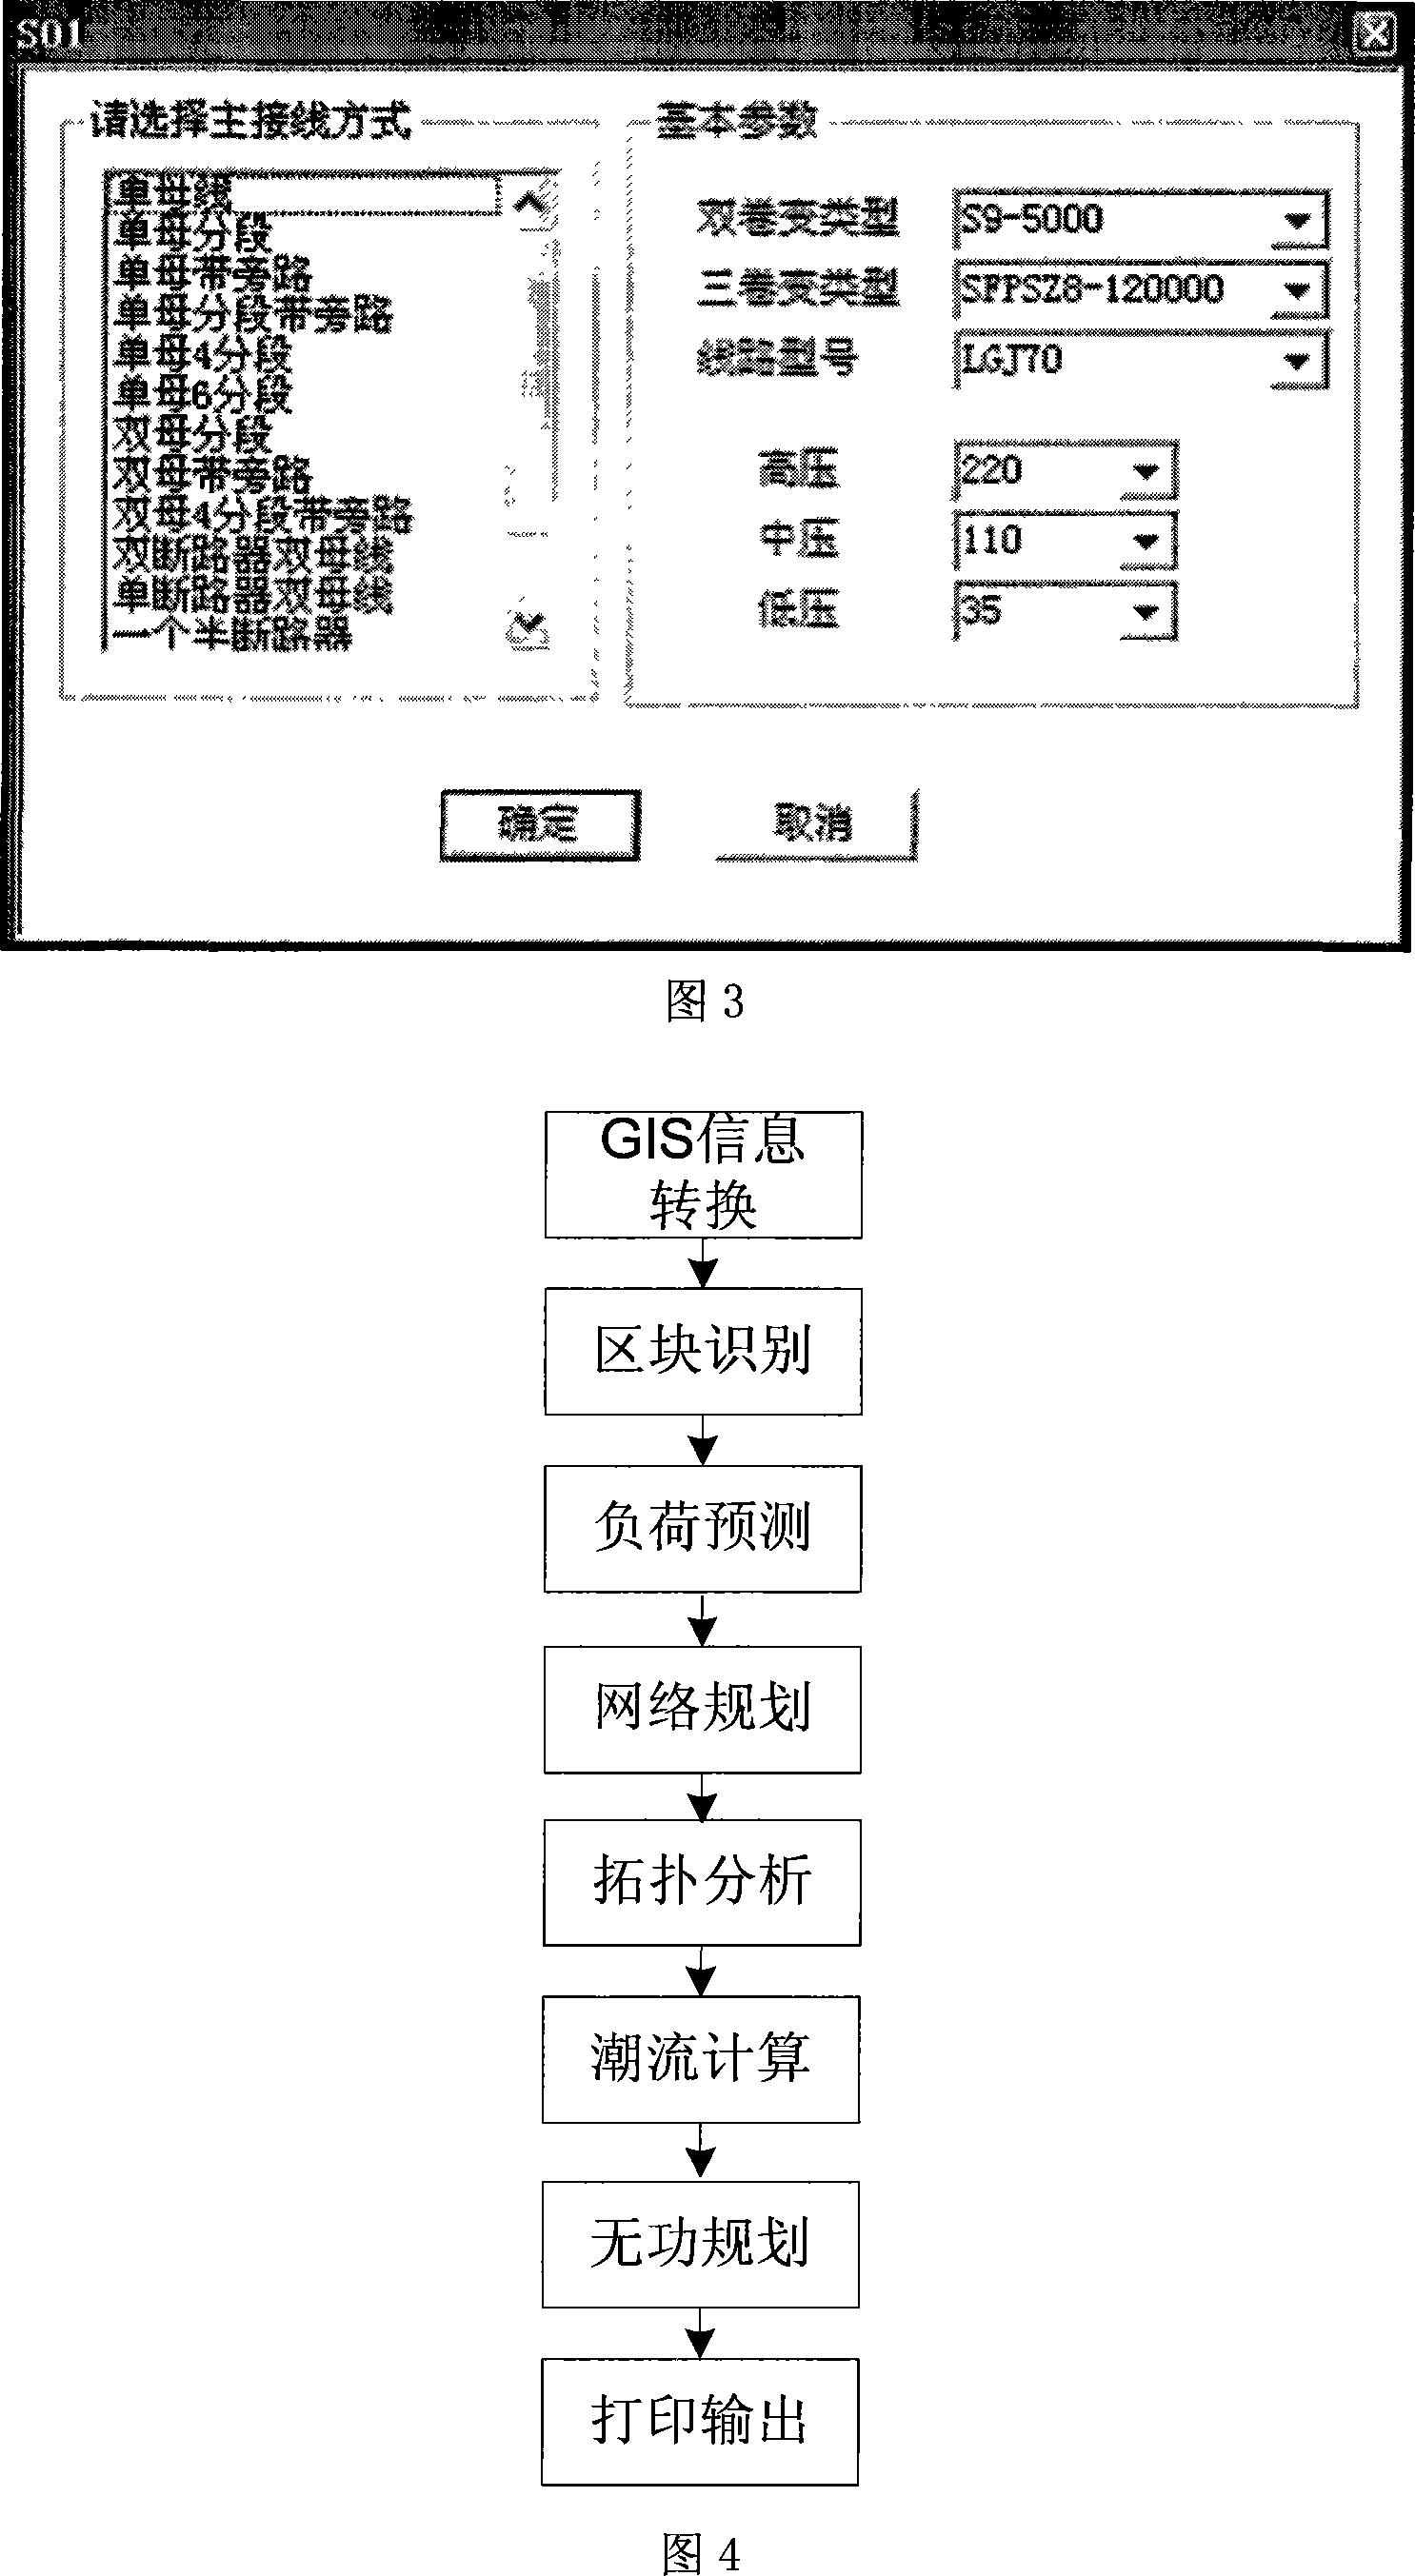 Electrified wire netting layout computer auxiliary decision-making support system